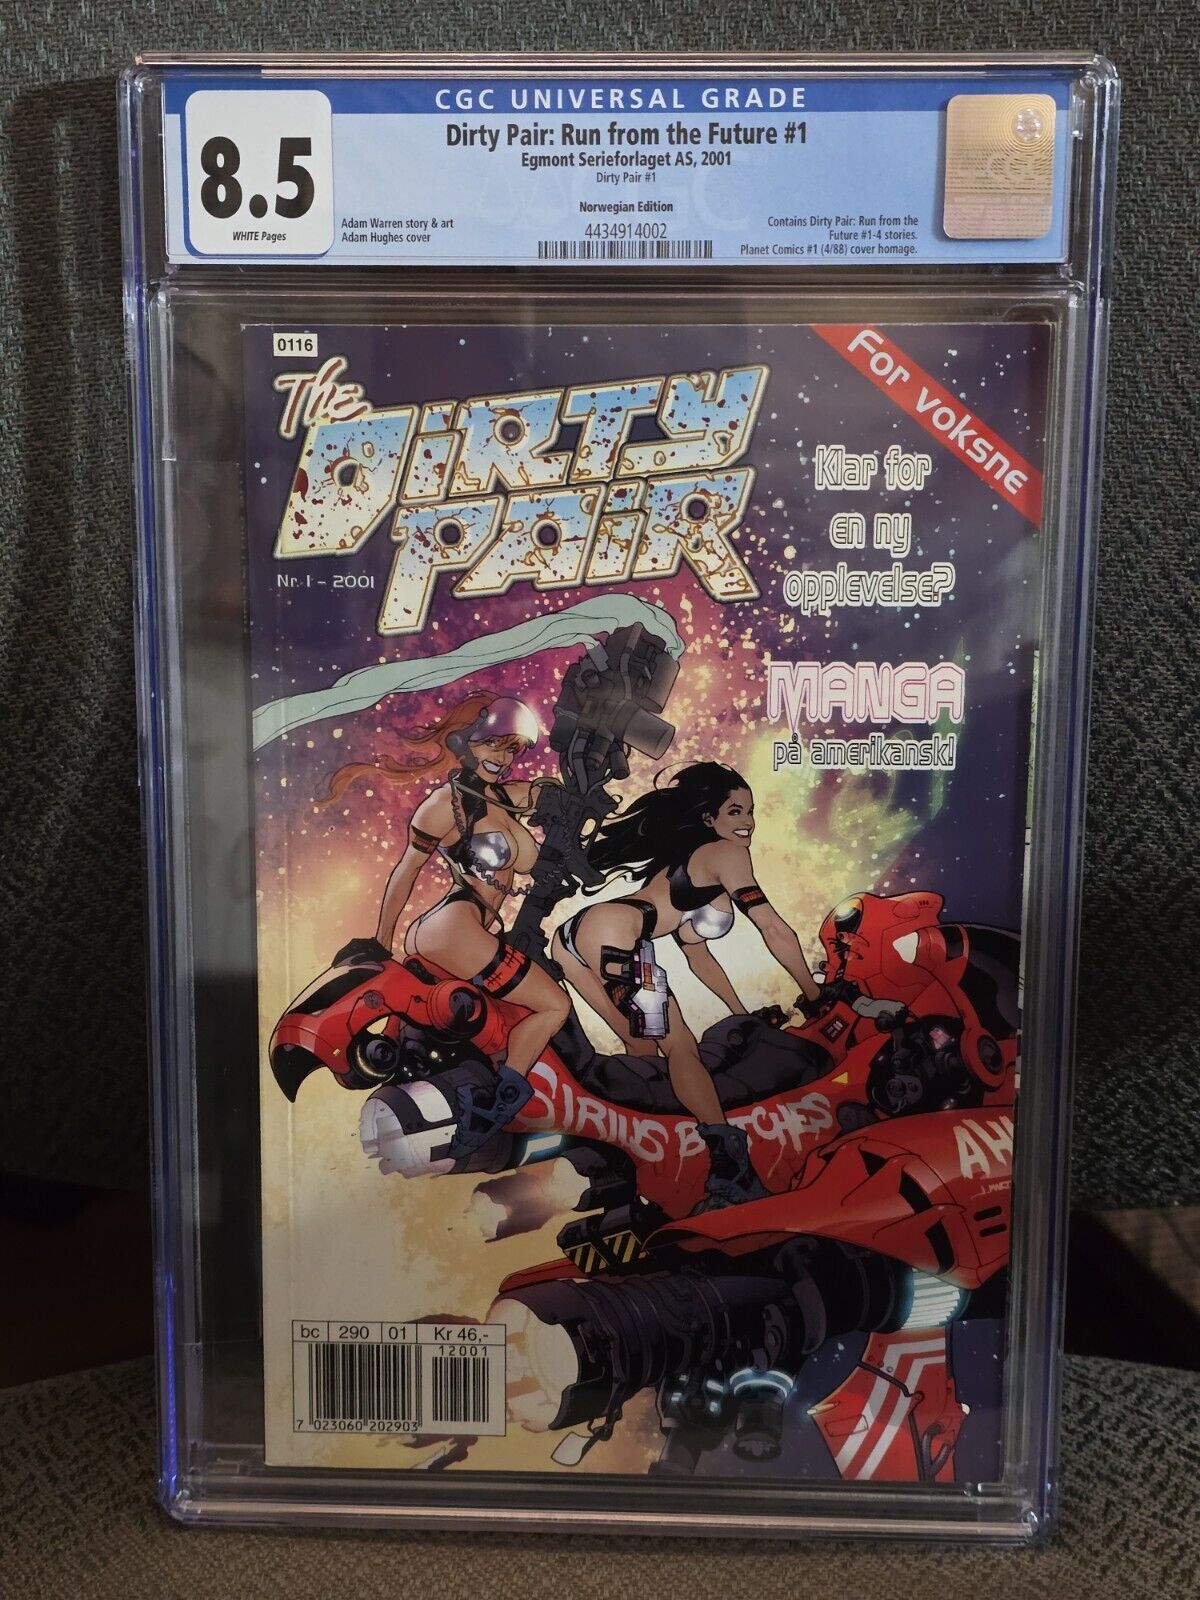 Dirty Pair: Run From The Future #1 Norwegian Edition CGC 8.5 HTF RARE FOREIGN 